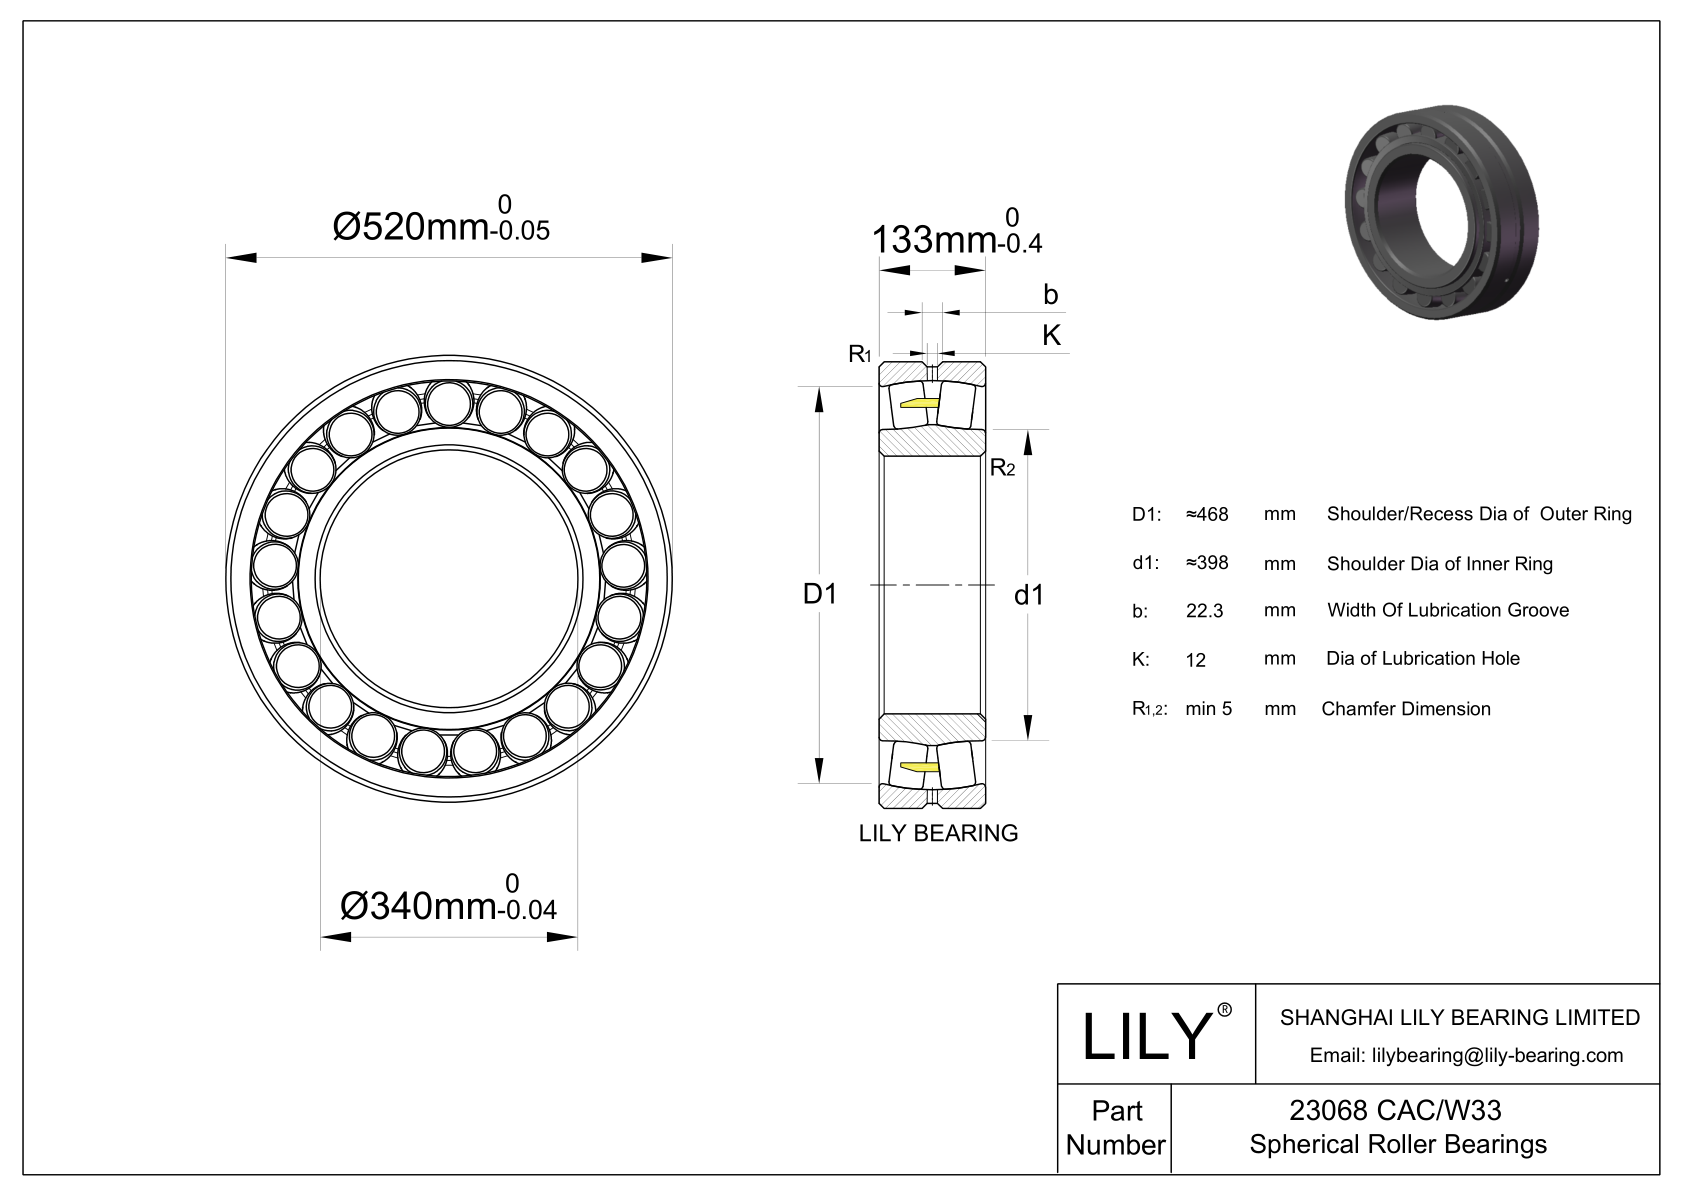 23068 CAC/W33 Double Row Spherical Roller Bearing cad drawing